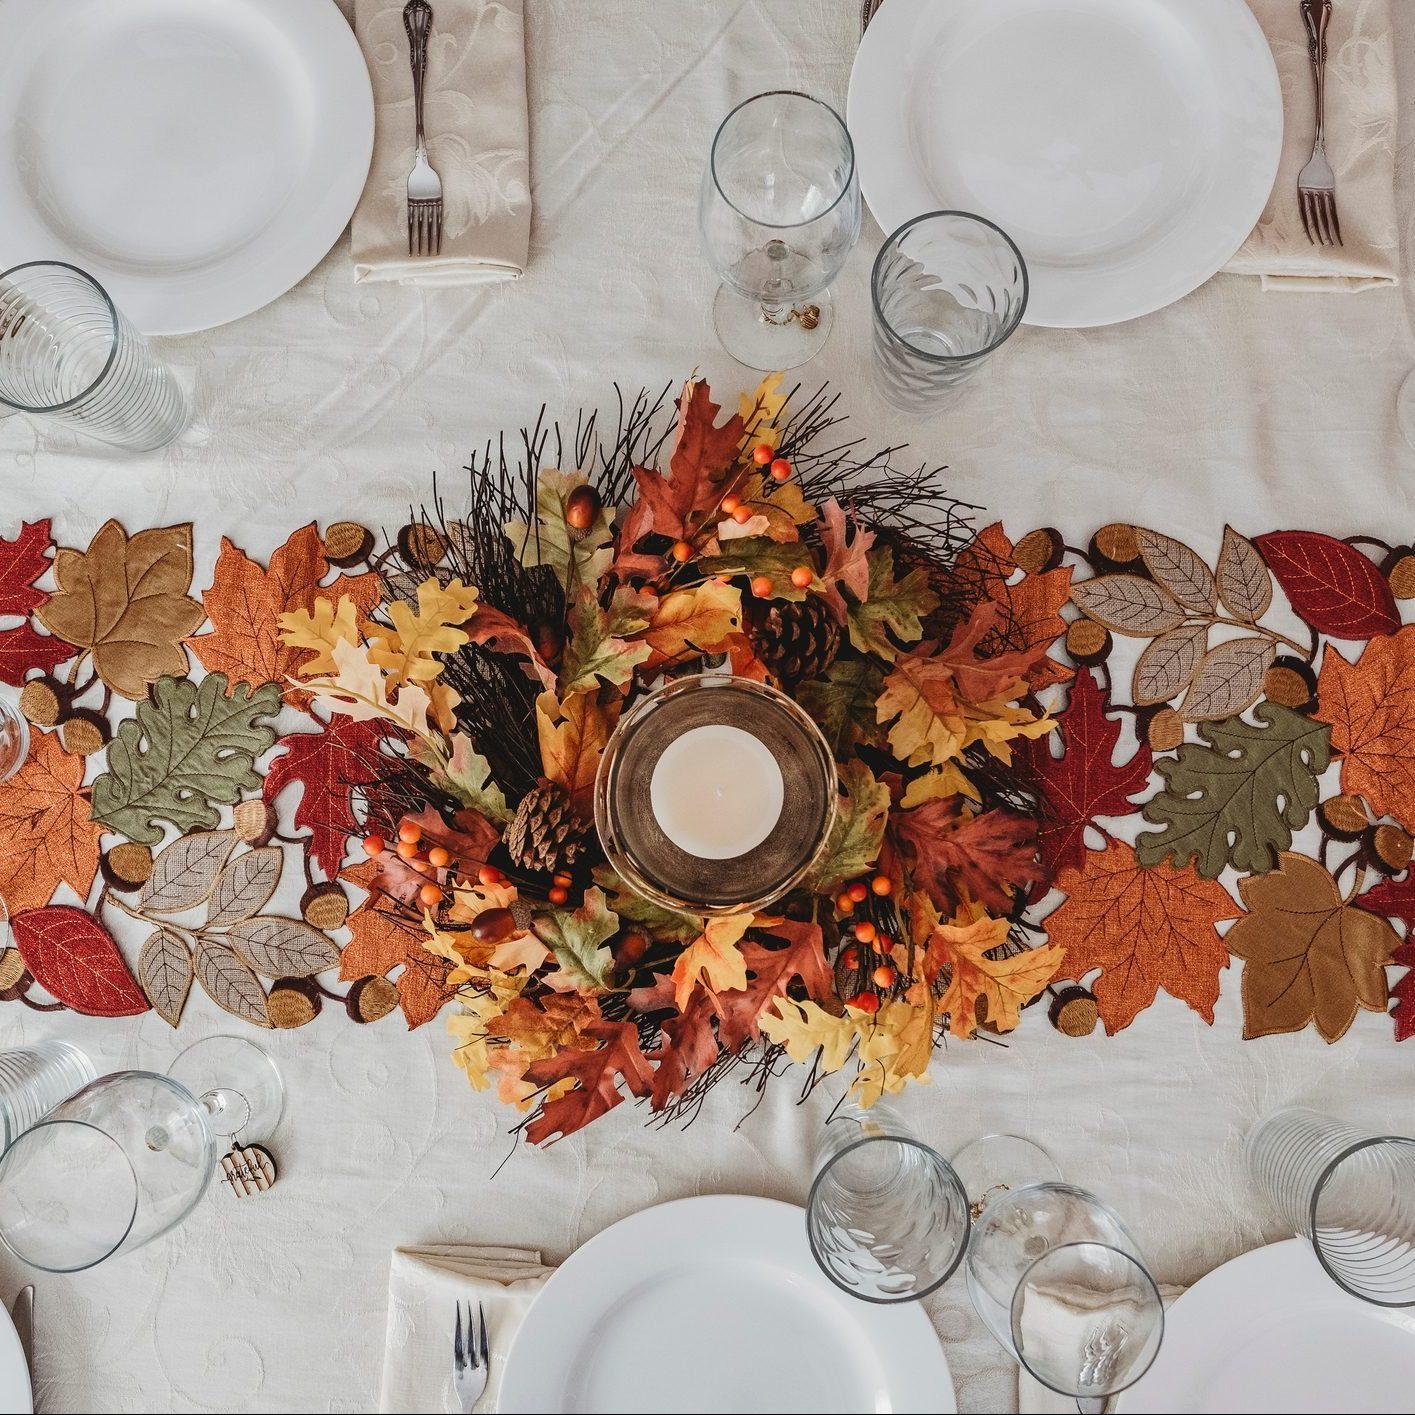 Table festively decorated for autumn holidays